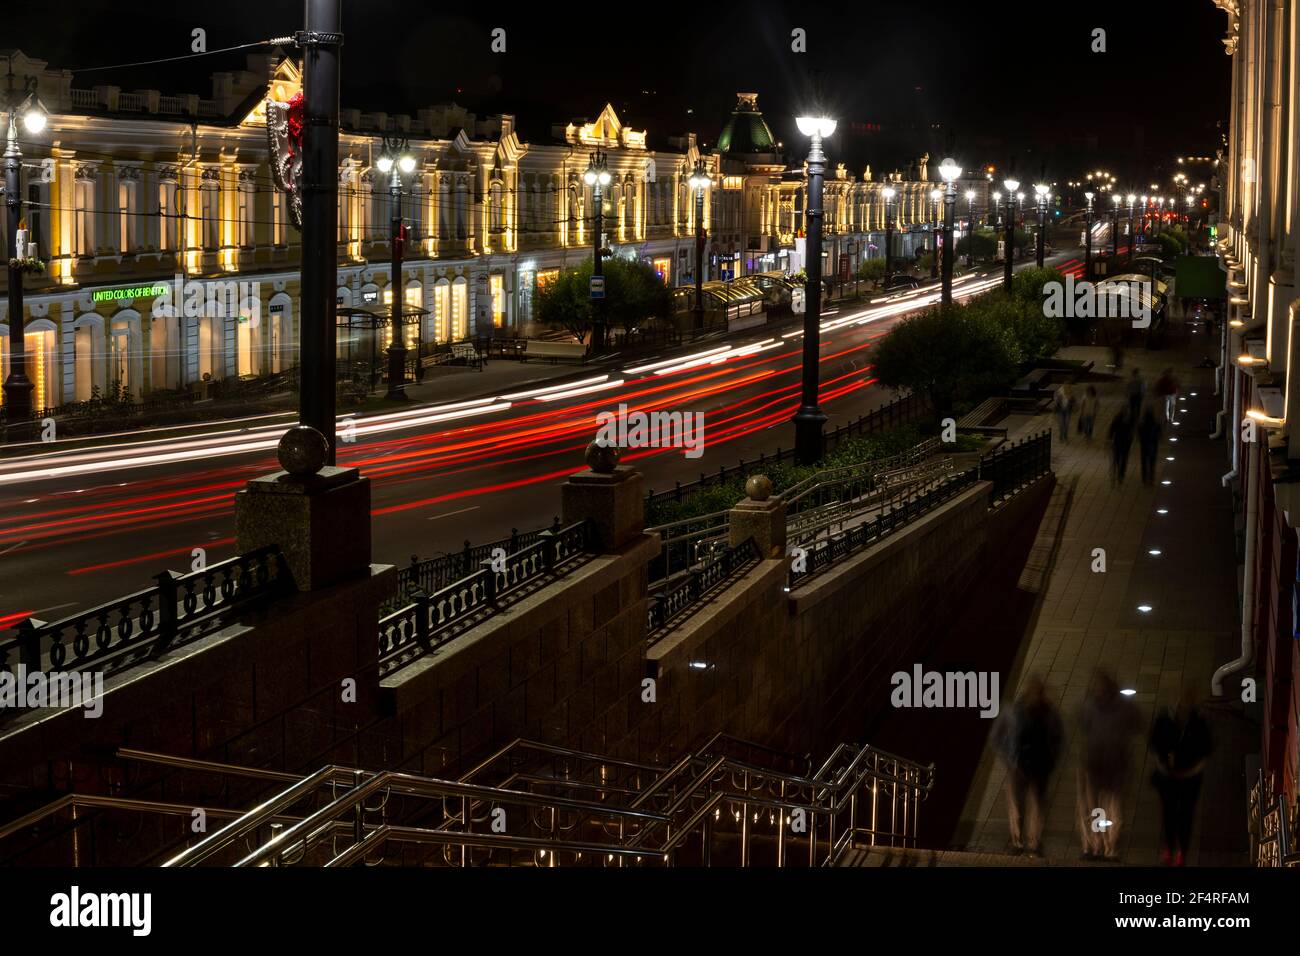 Omsk, Russia - September 13, 2019: People in the streets of Omsk with great architectural buildings at night with red car lights, Siberia, Russia. Stock Photo